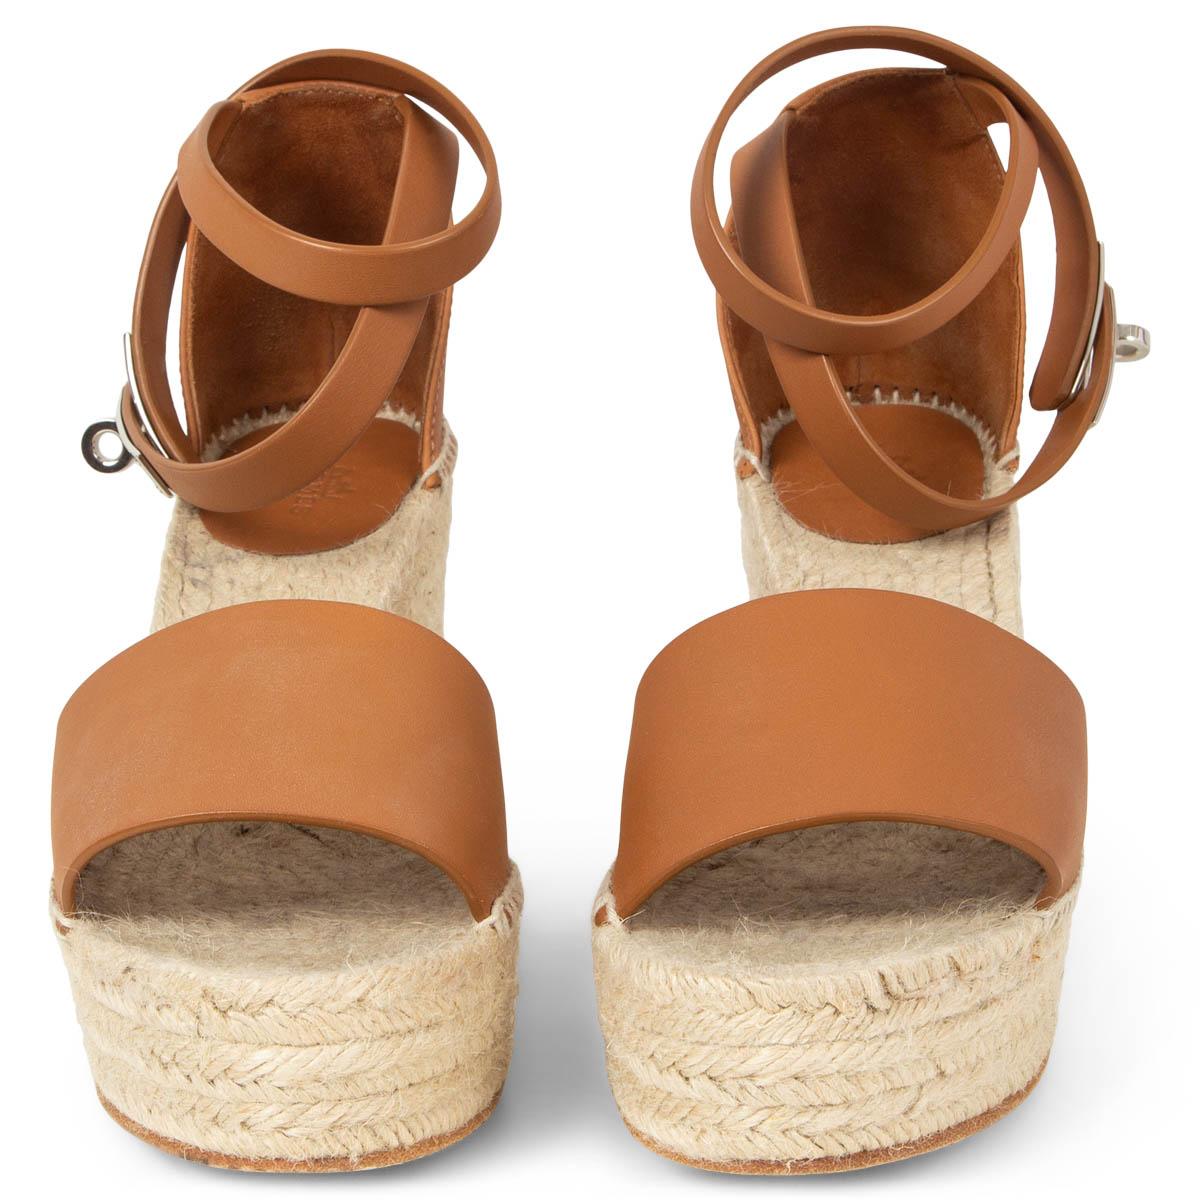 100% authentic Hermès Tipoli Espadrille wedge sandals in Gold smooth calfskin with iconic buckle, wedge heel and wrap-around ankle strap. Have been worn and are in excellent condition. 

Measurements
Imprinted Size	40
Inside Sole	26cm